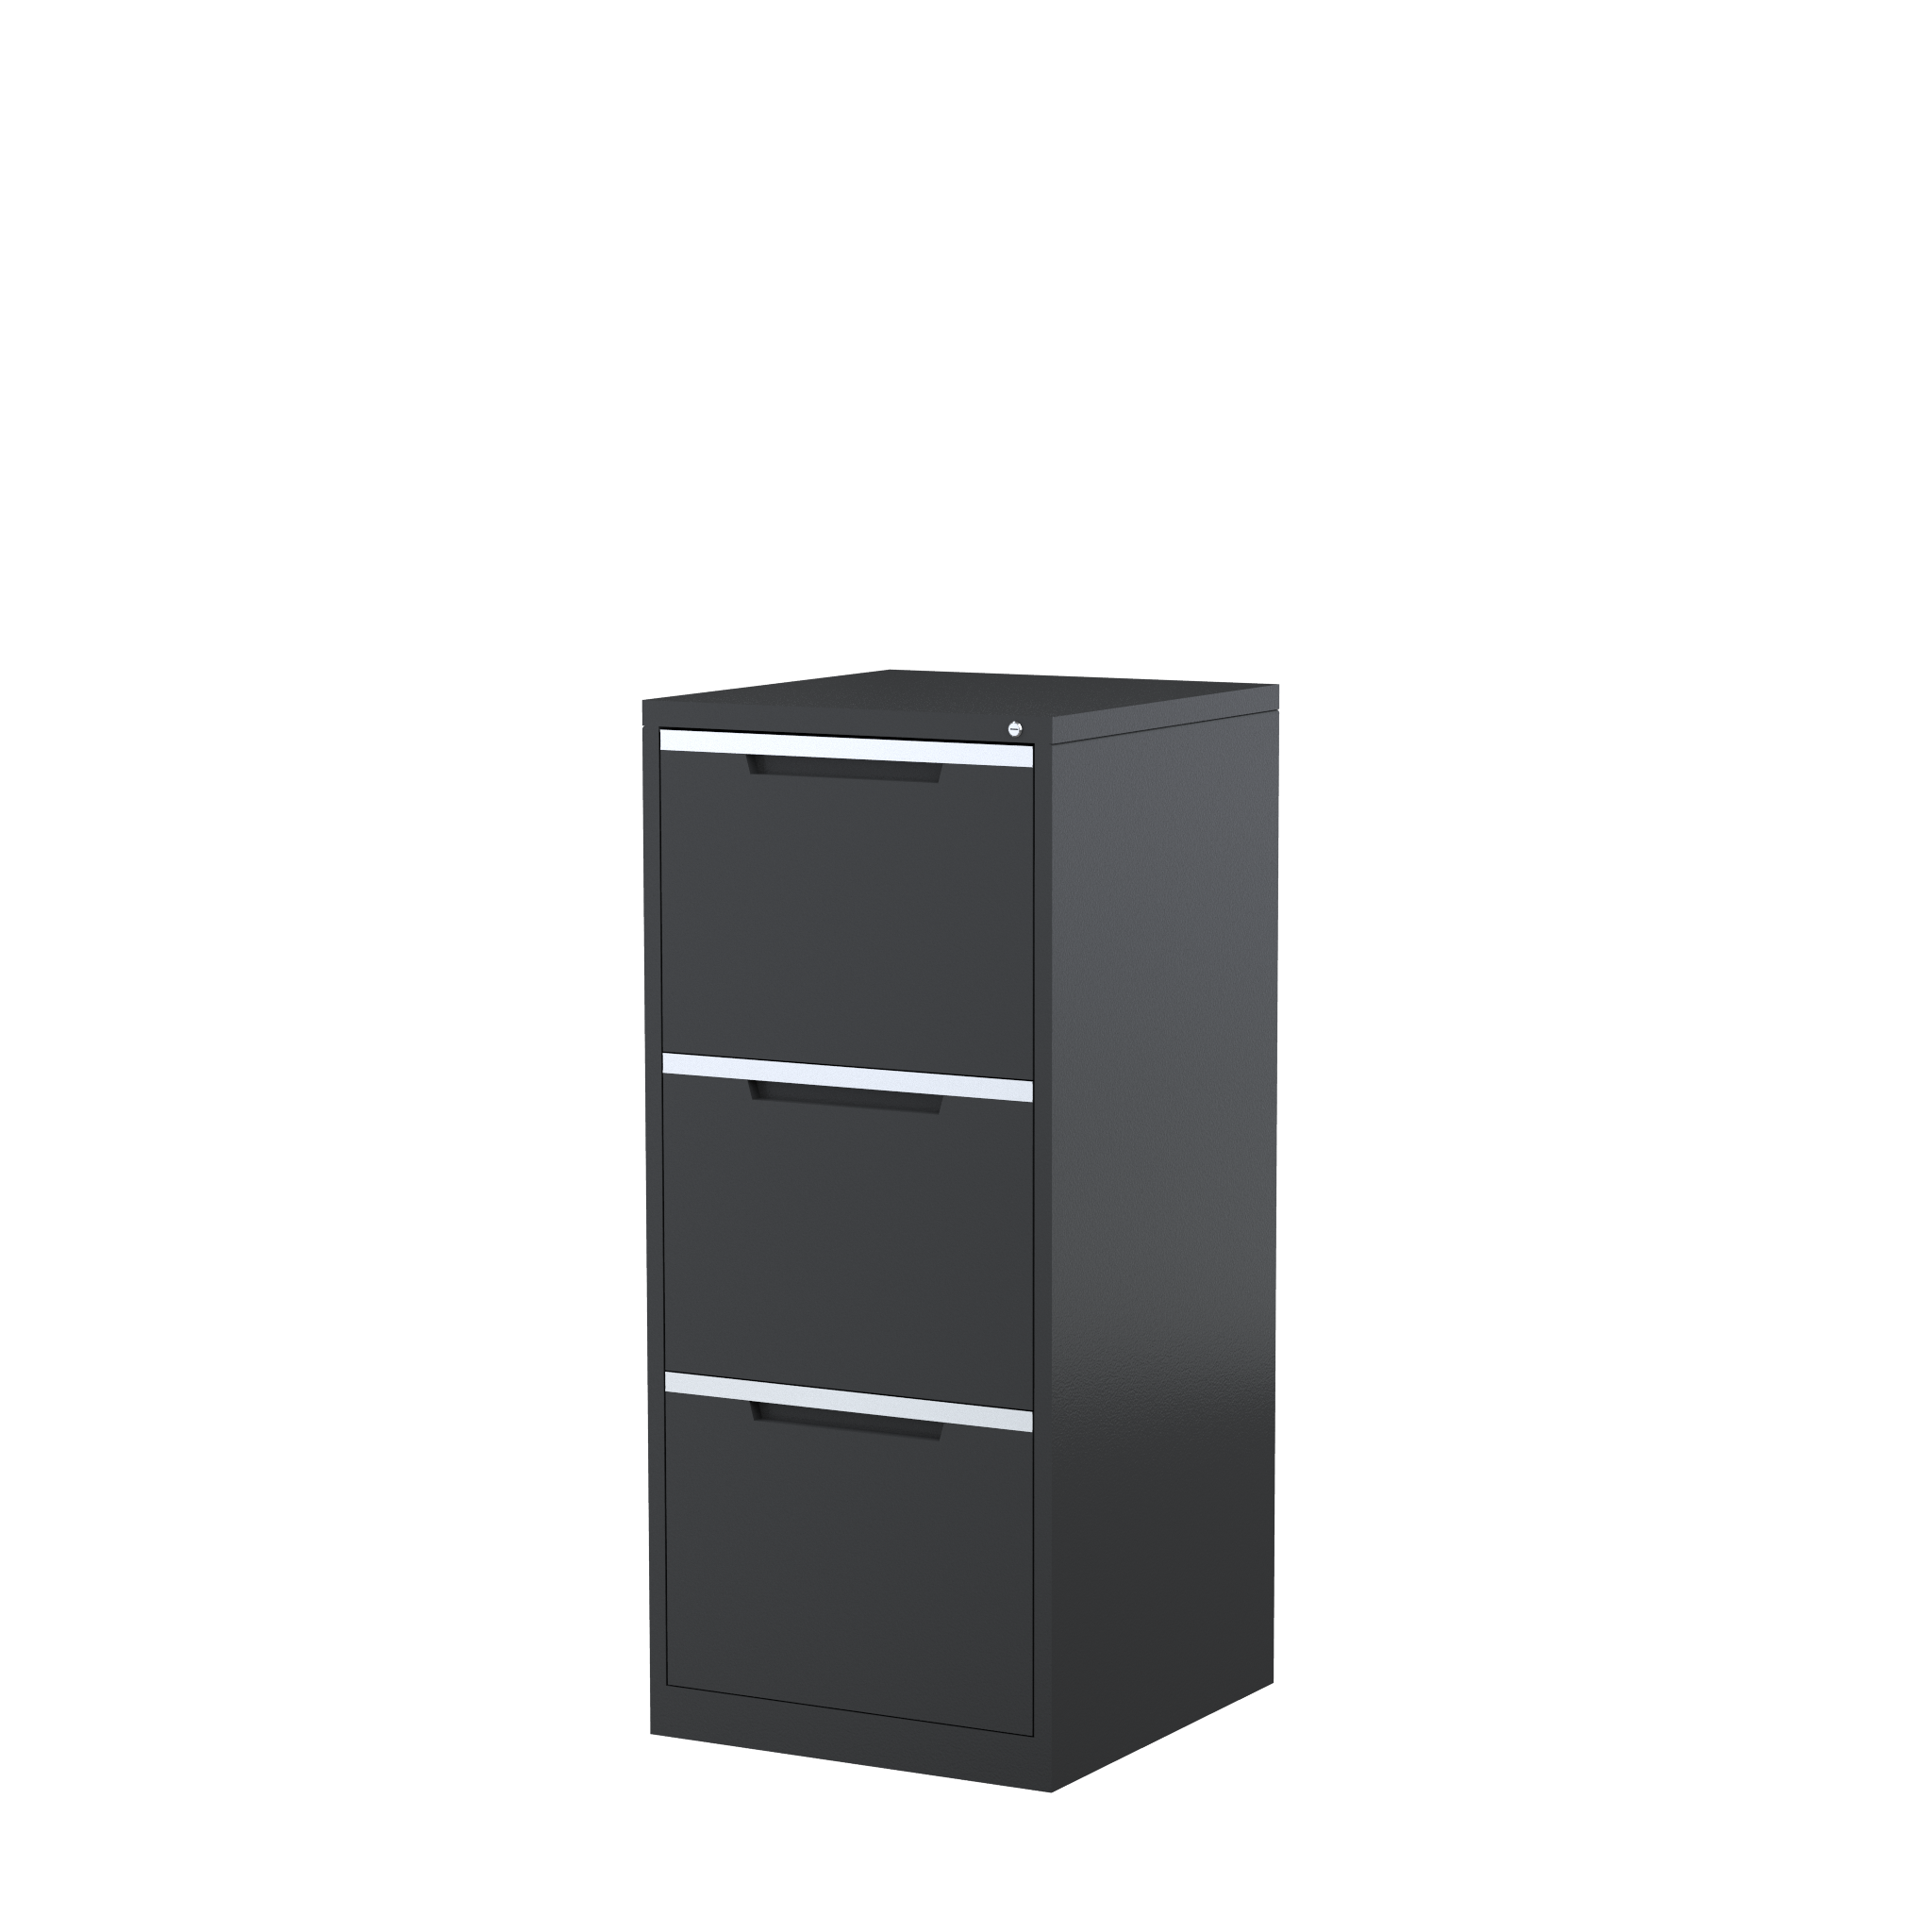 VFA3 - STEELCO A3 - 3 Drawer VFC 1320H x 580W x 620D-GR.png